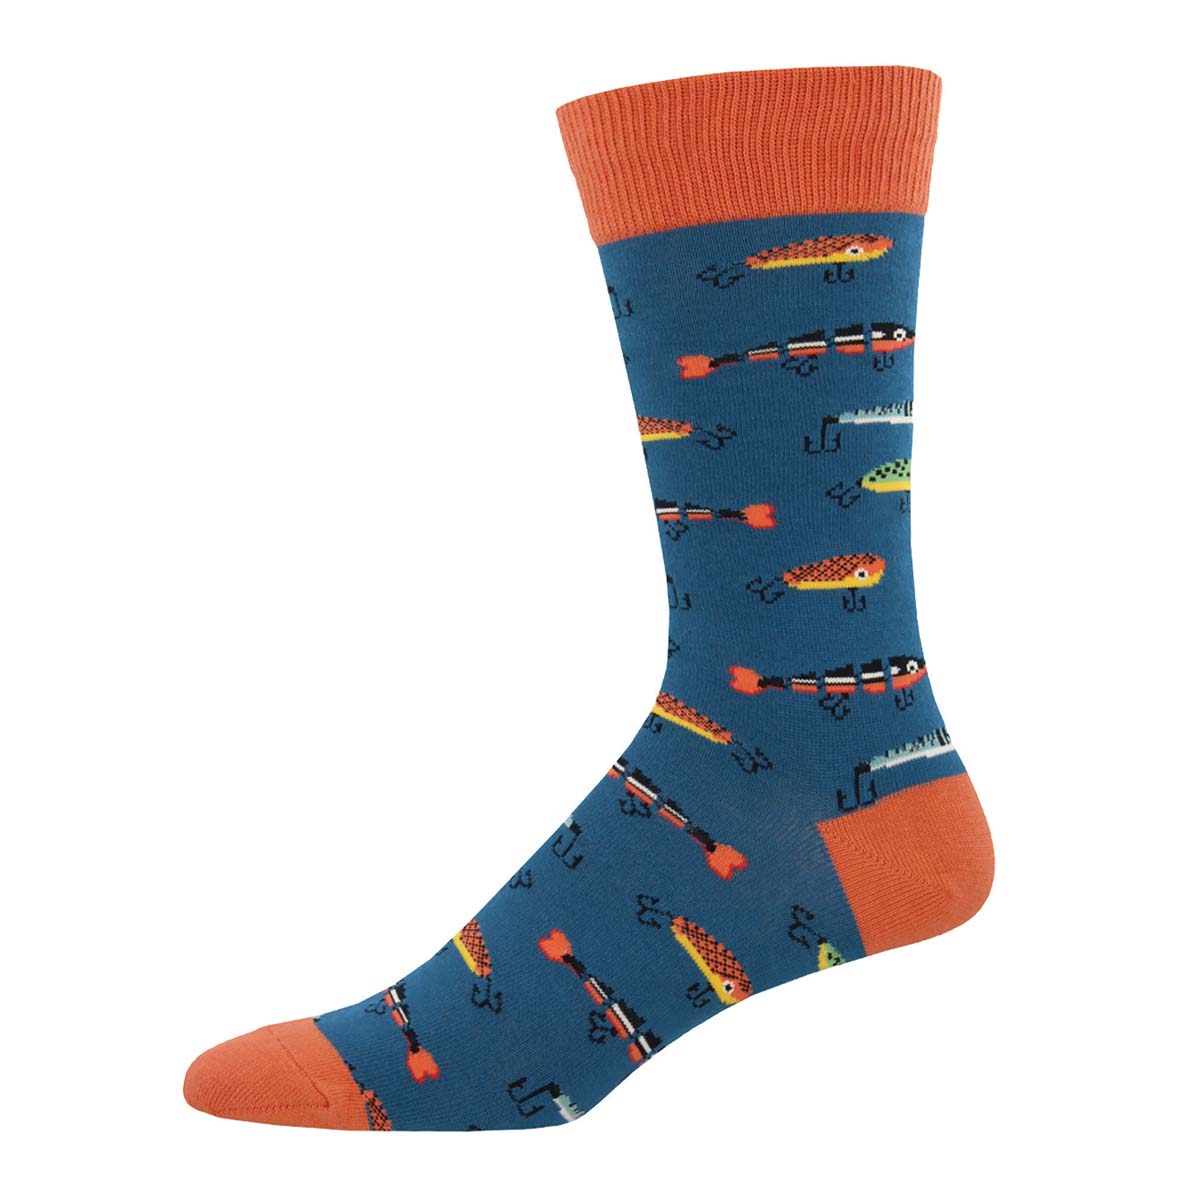  Fishing Socks for Men Fly Fishing Accessories Fish Print Socks  1-Pair Novelty Crew Socks : Clothing, Shoes & Jewelry